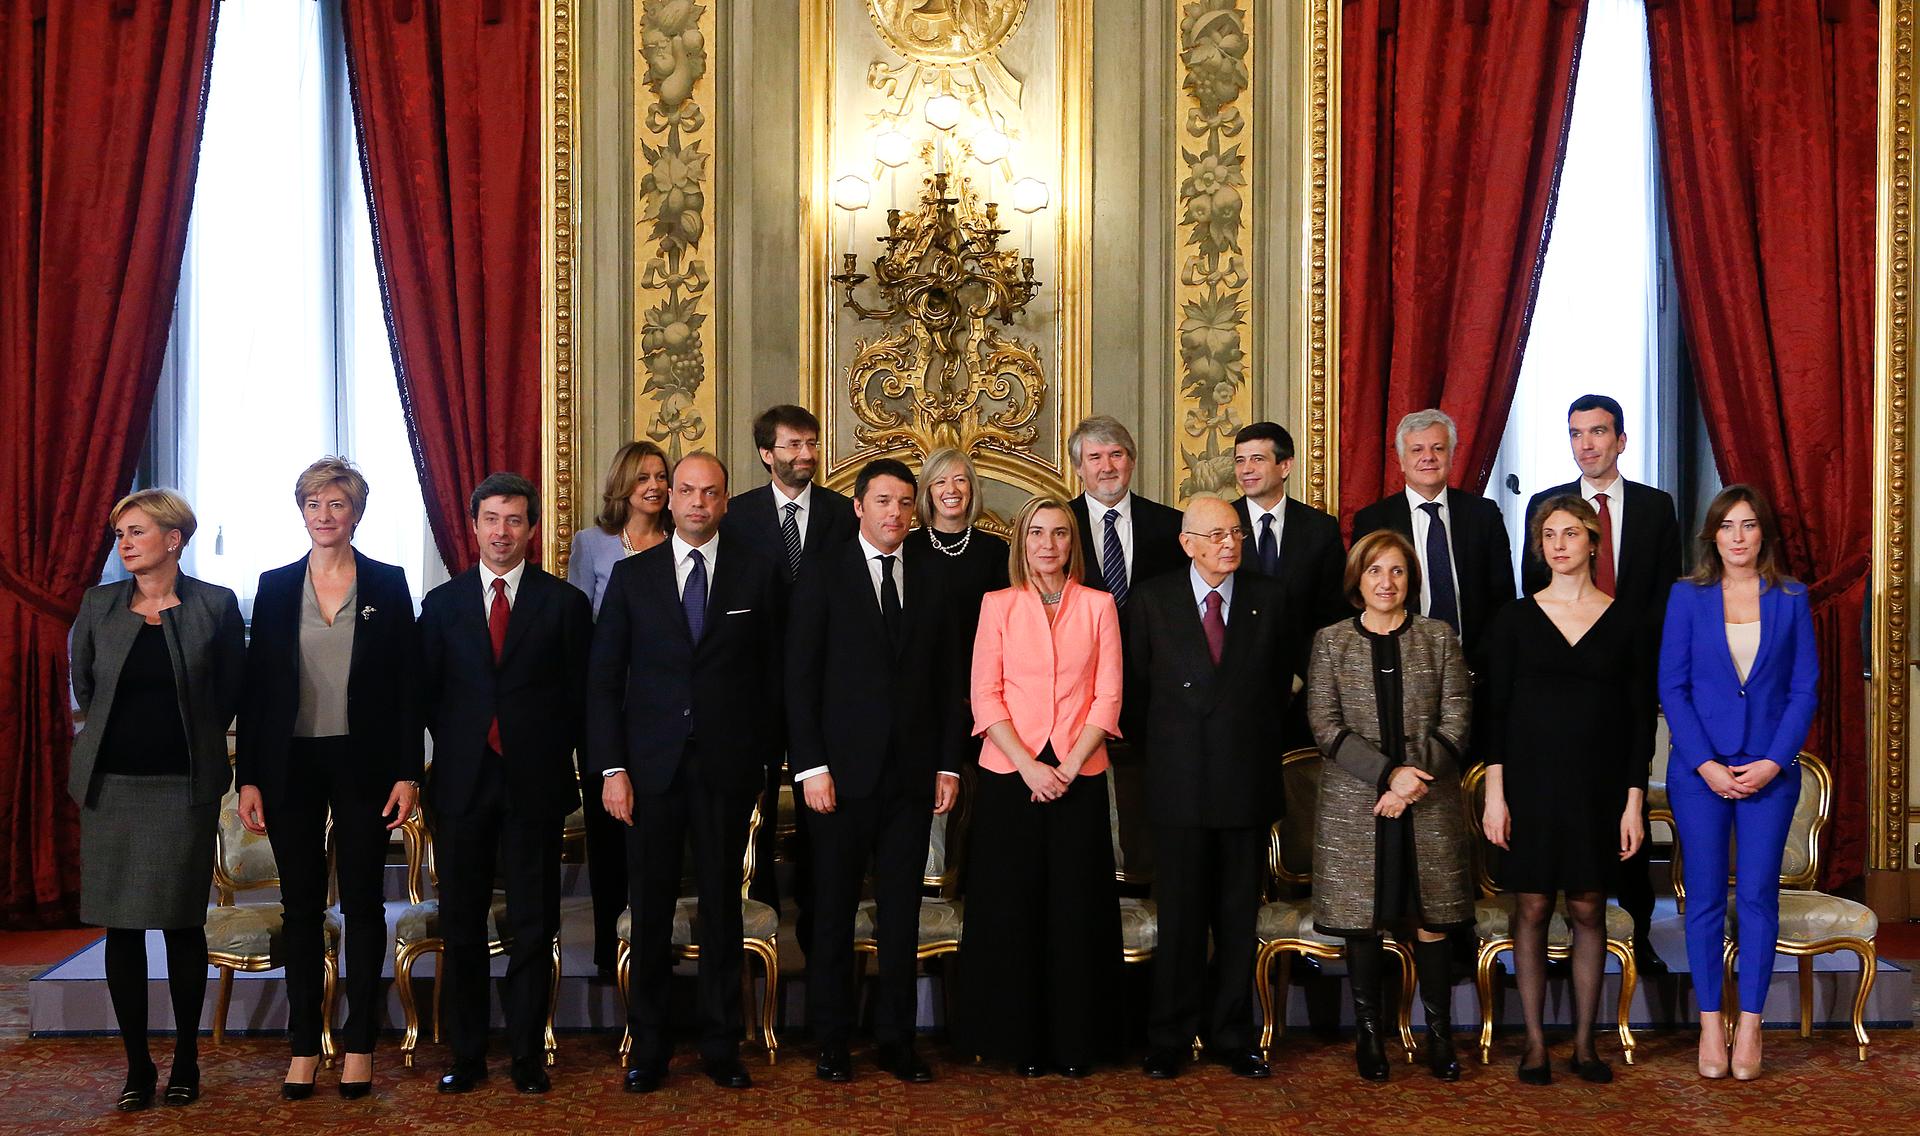 Italy's Prime Minister Matteo Renzi and members of his cabinet pose with President Giorgio Napolitano.